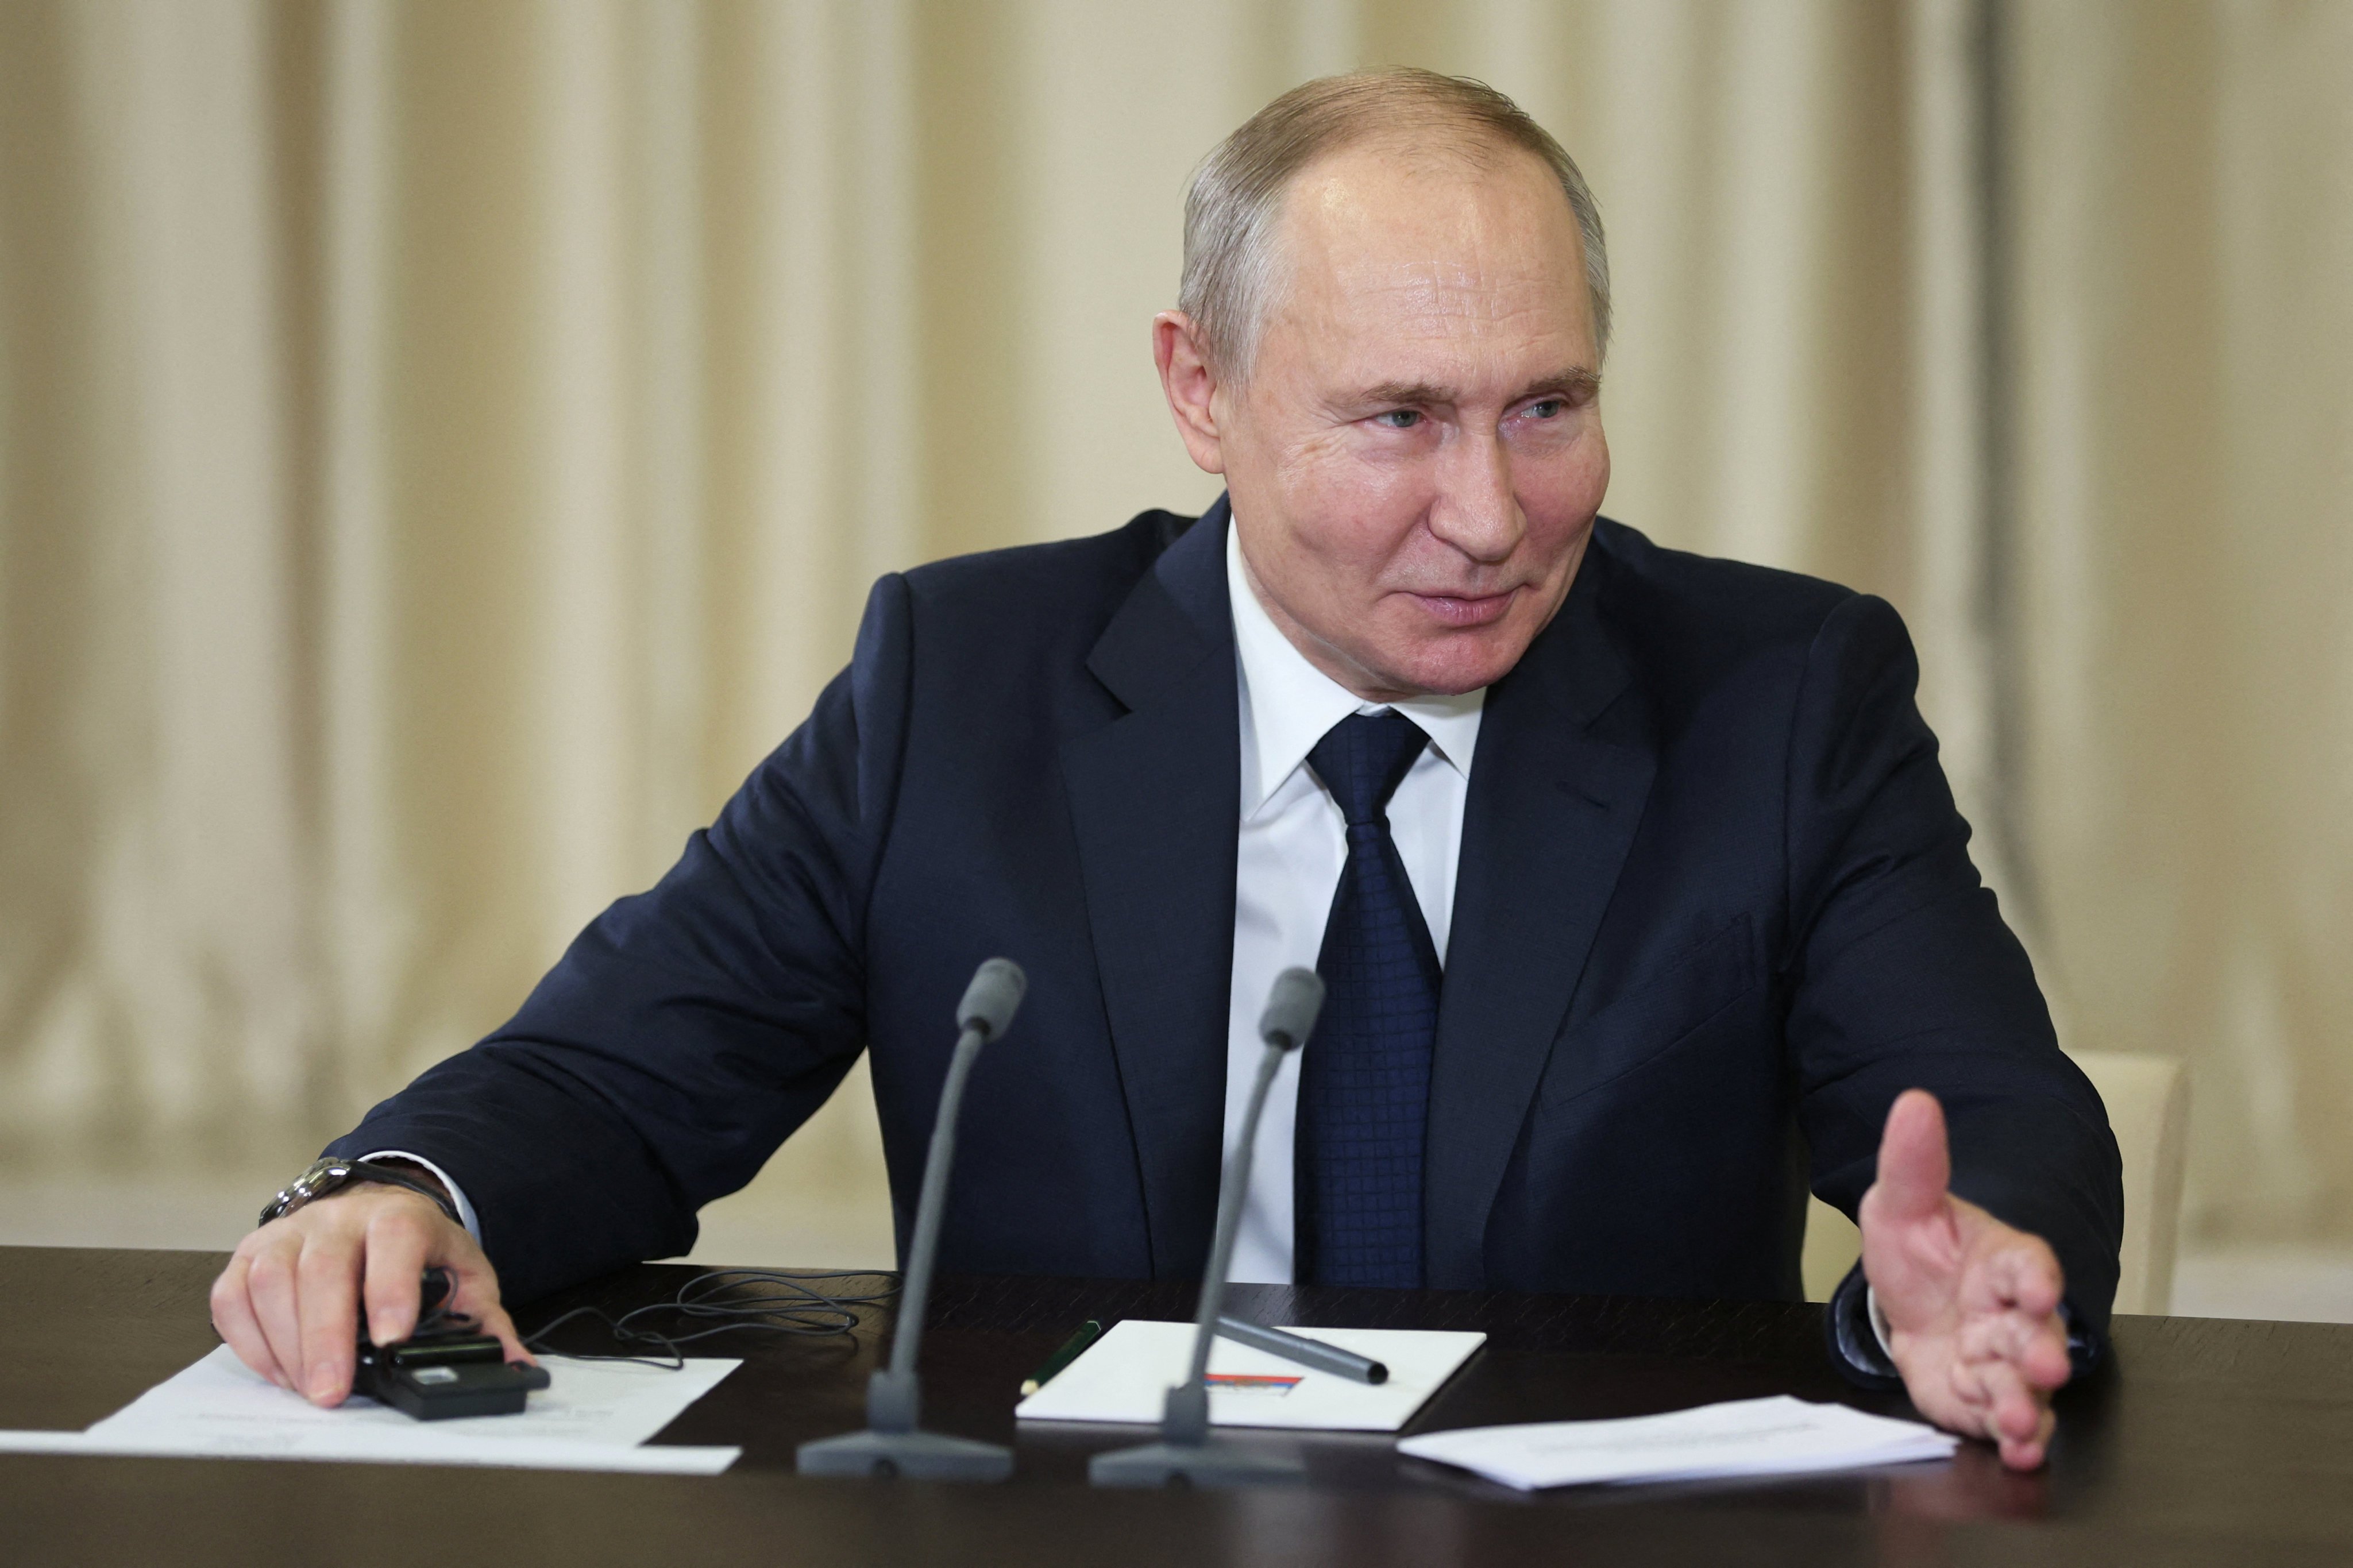 Russian President Vladimir Putin speaks during a meeting at the Novo-Ogaryovo state residence outside Moscow on Wednesday. Photo: Sputnik via Reuters